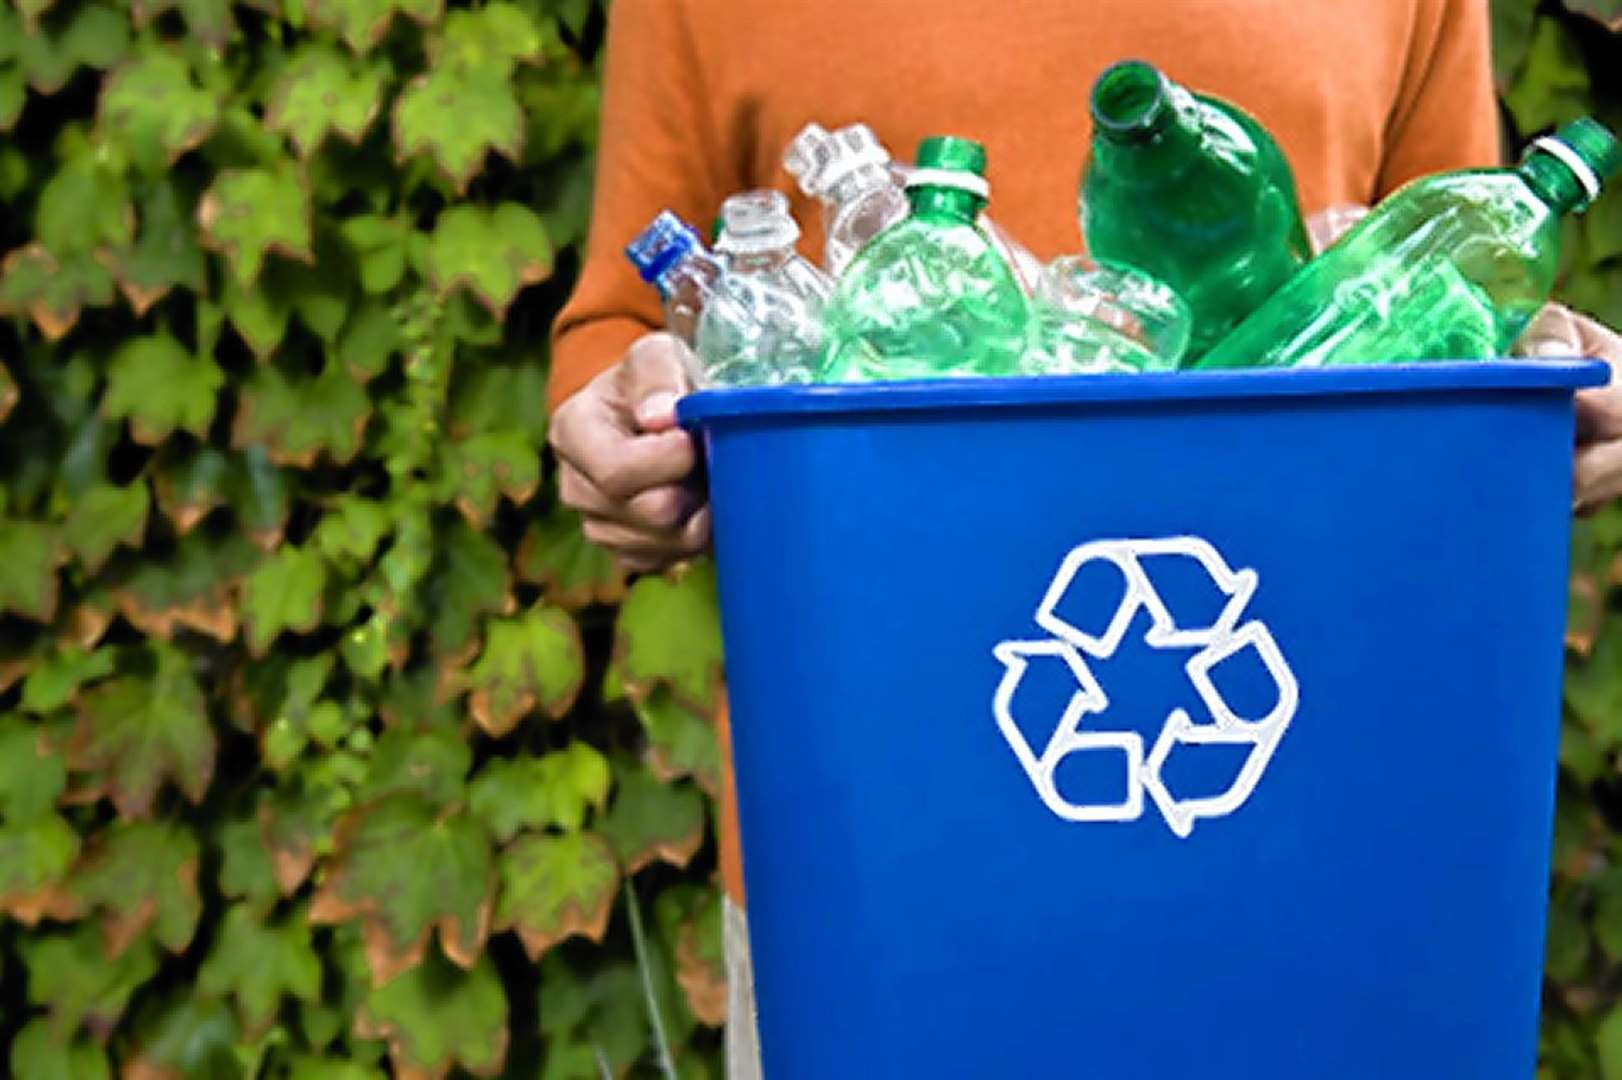 Aberdeenshire Council is looking to increase recycling rates in the region.